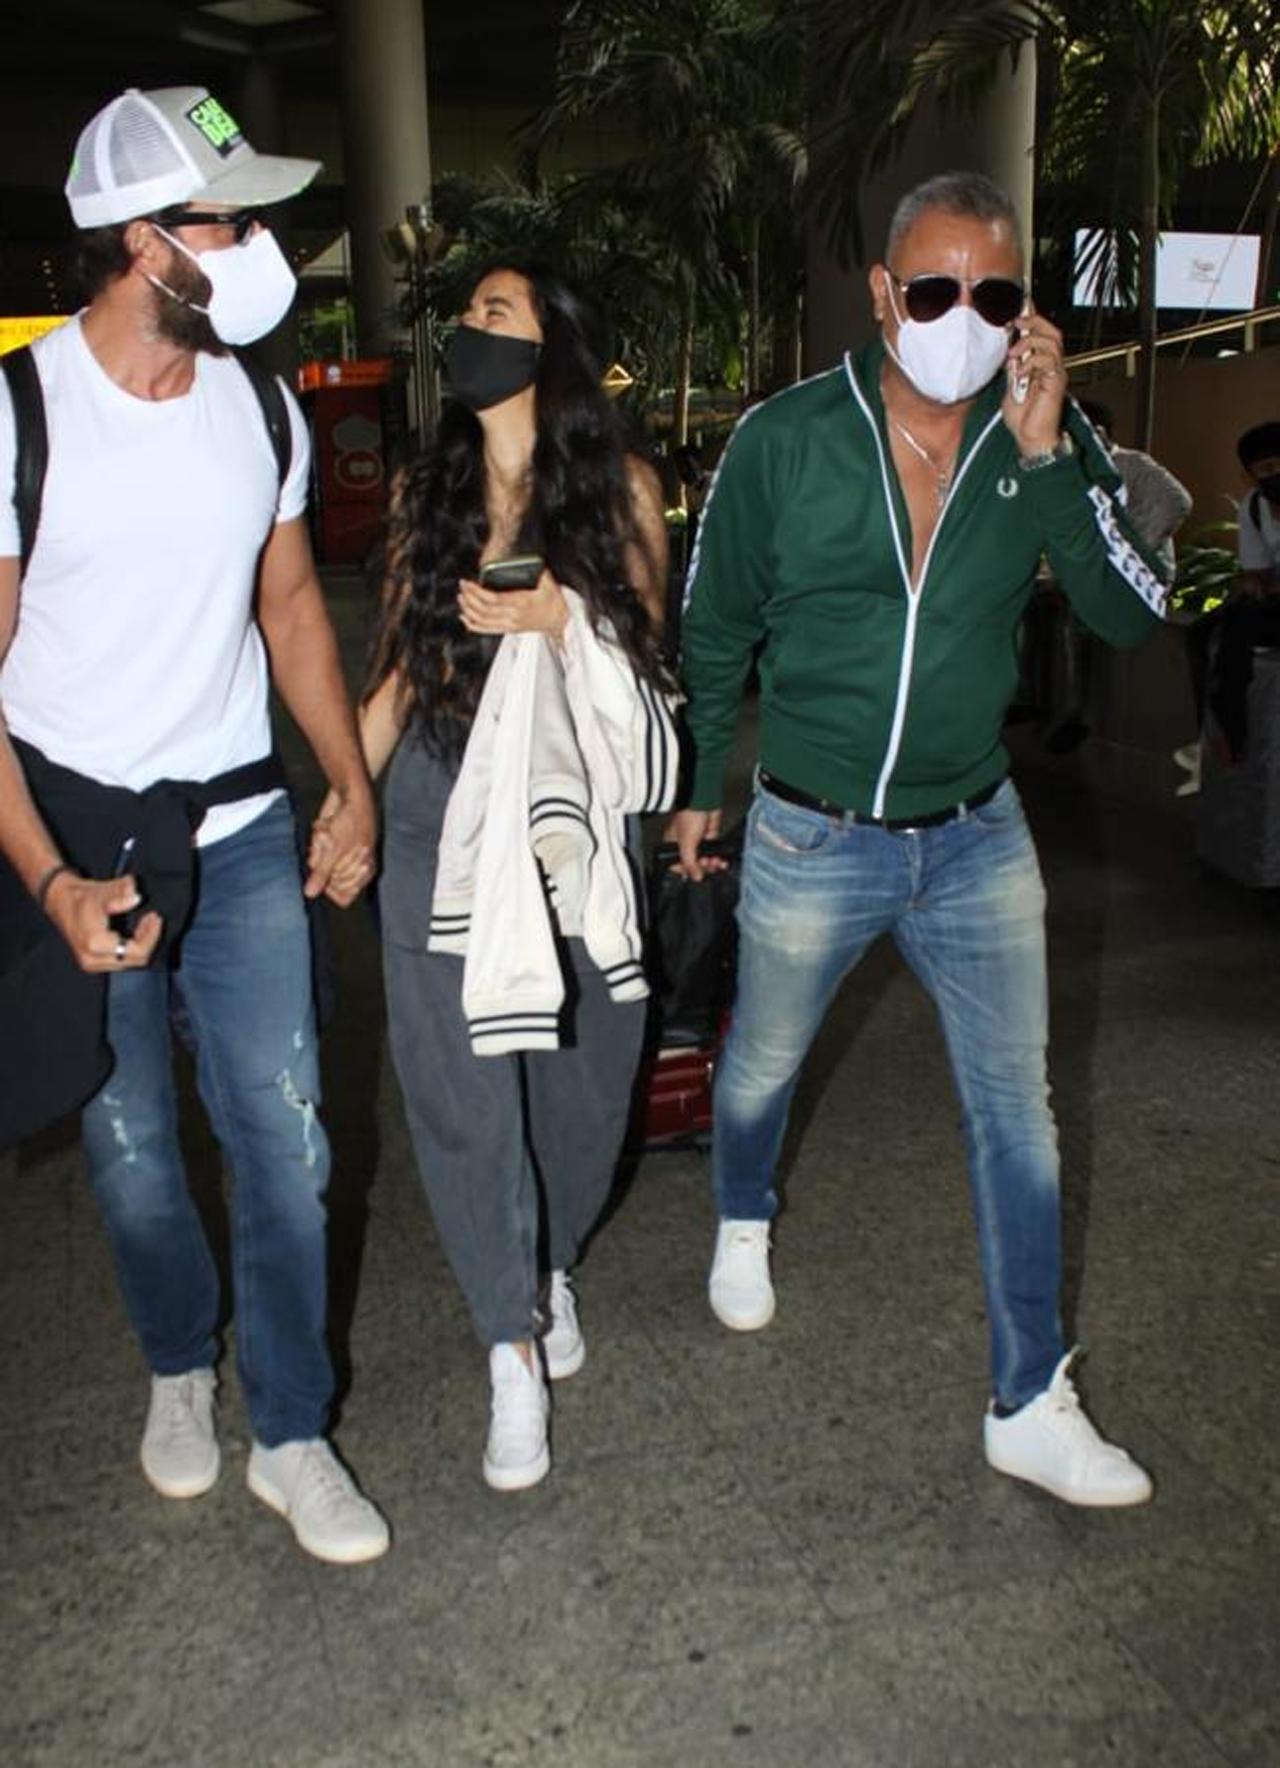 Dating rumours of the two sparked when they were spotted out on a dinner date together. A few days later, Saba also joined Roshans for a get-together. Hrithik's uncle, Rajesh Roshan, shared the family photo on Instagram that featured Saba with family members, including Hrithik's mother Pinkie Roshan, his sons Hrehaan and Hridaan, among others.